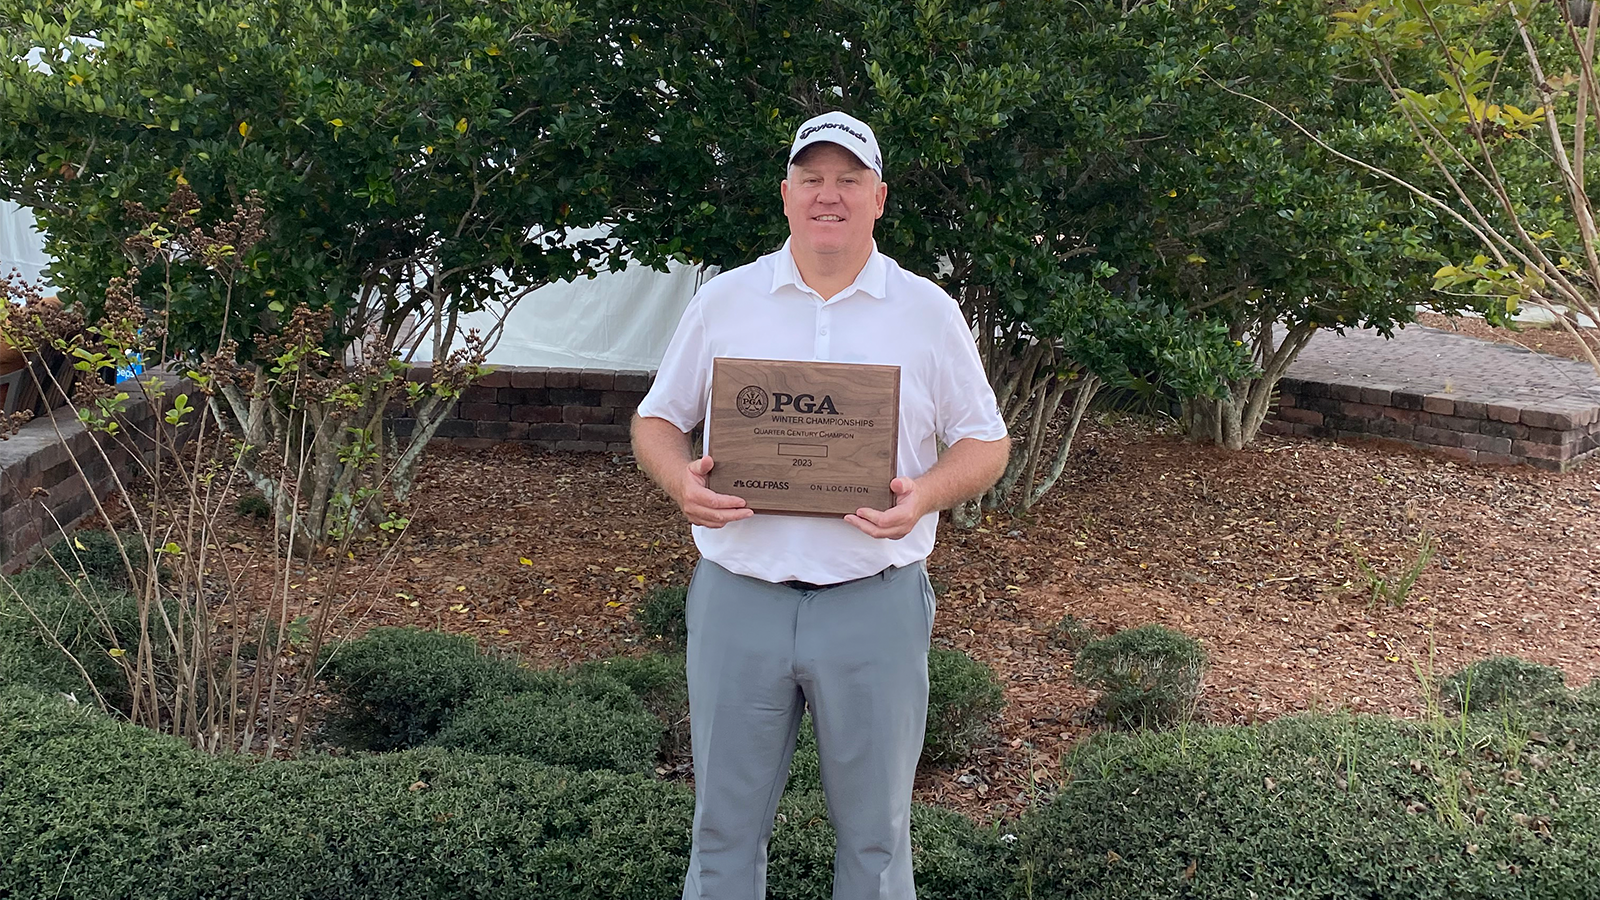 The Quarter Century Championship (ages 50-to-64) Champion Bob Sowards, PGA Director of Instruction at Kinsale Golf and Fitness Club in Powell, Ohio. 